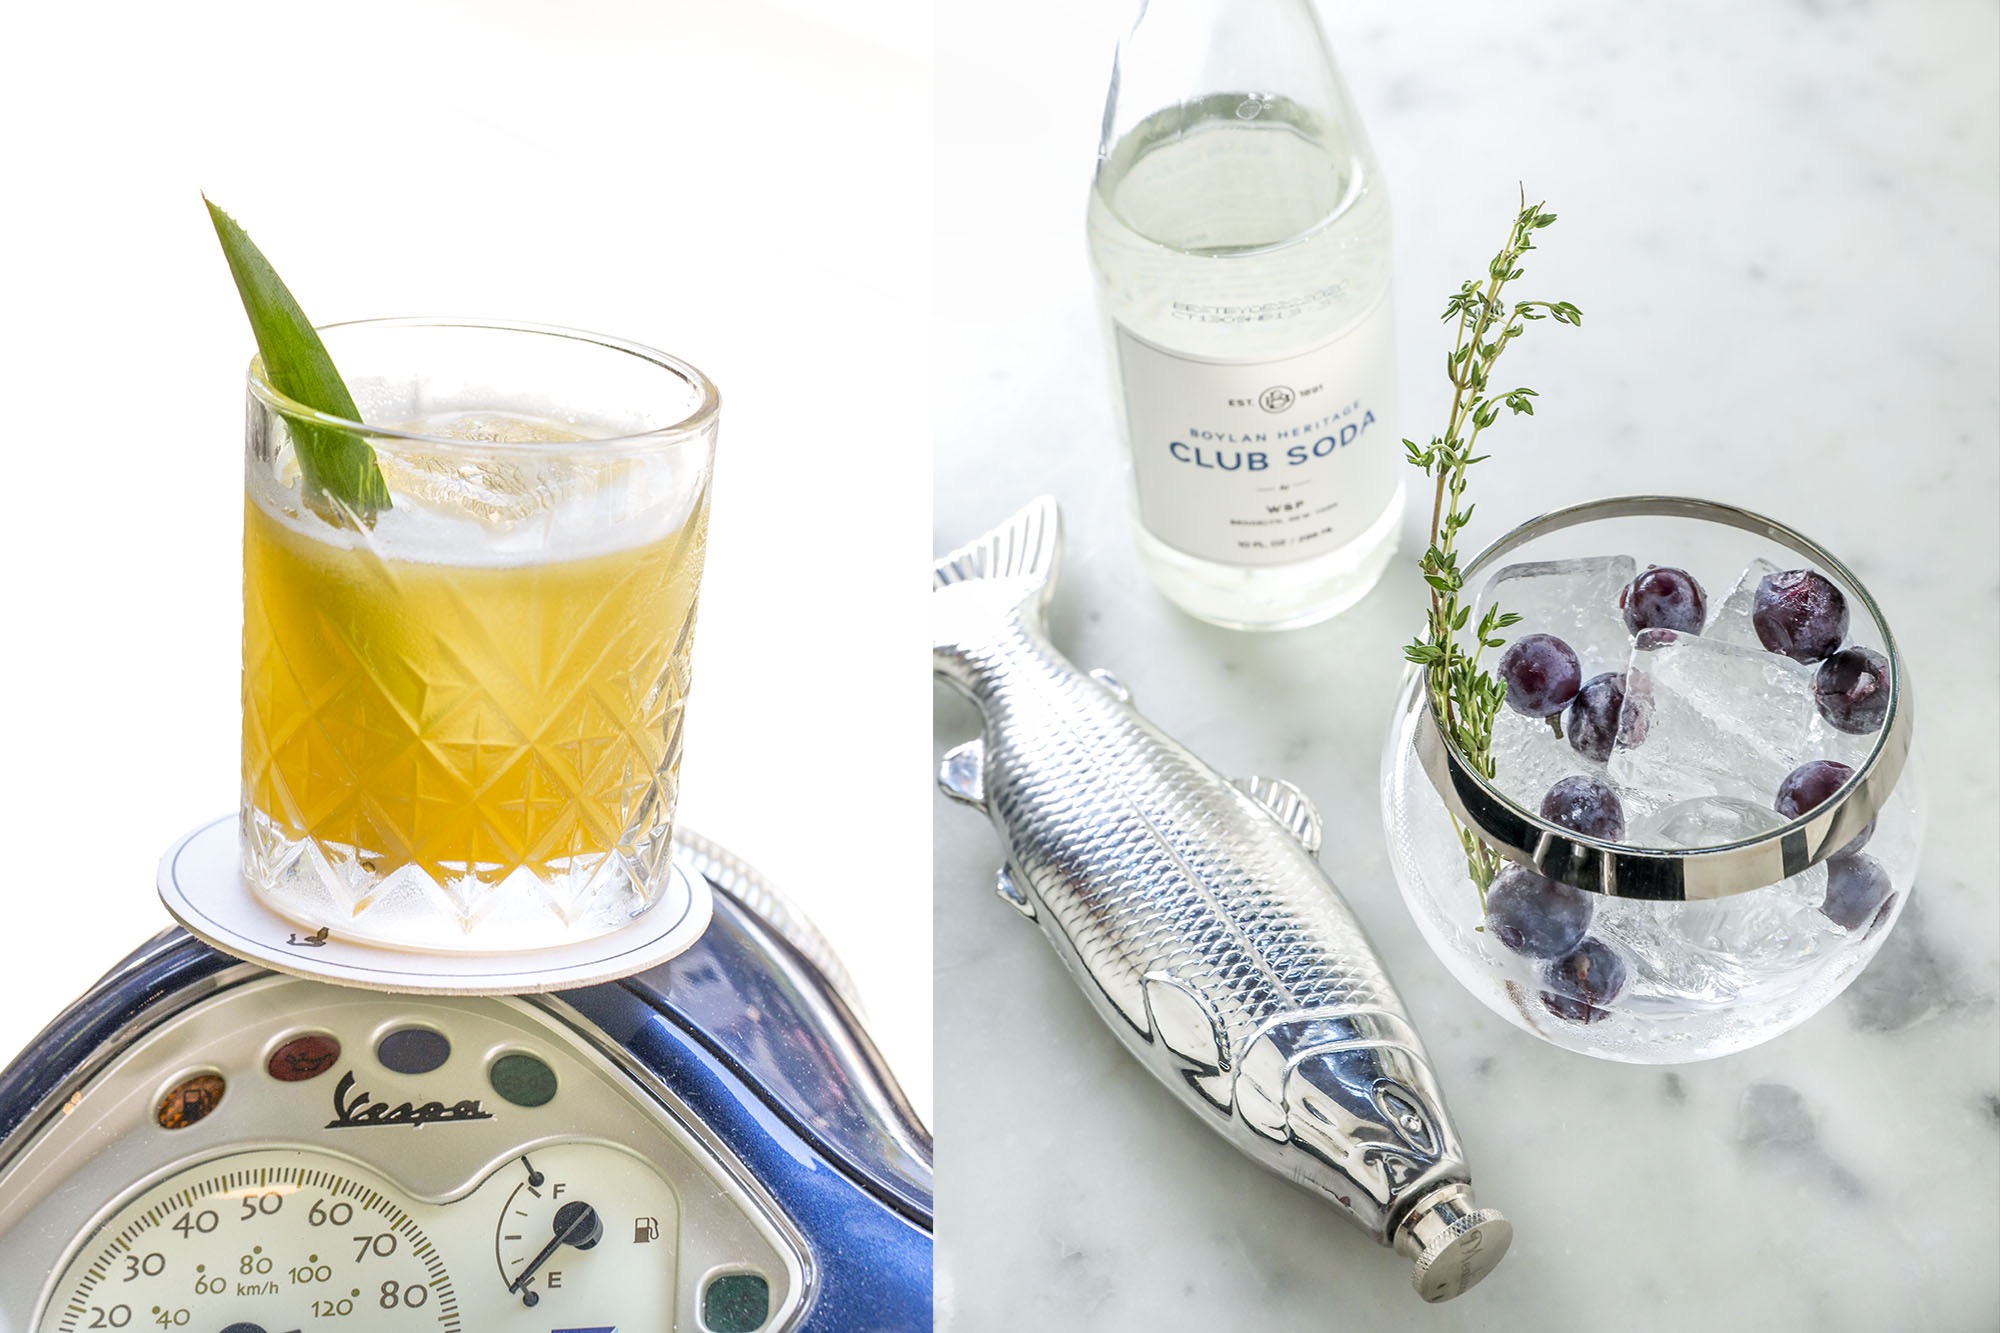 Drink with a fish flask and garnished with thyme